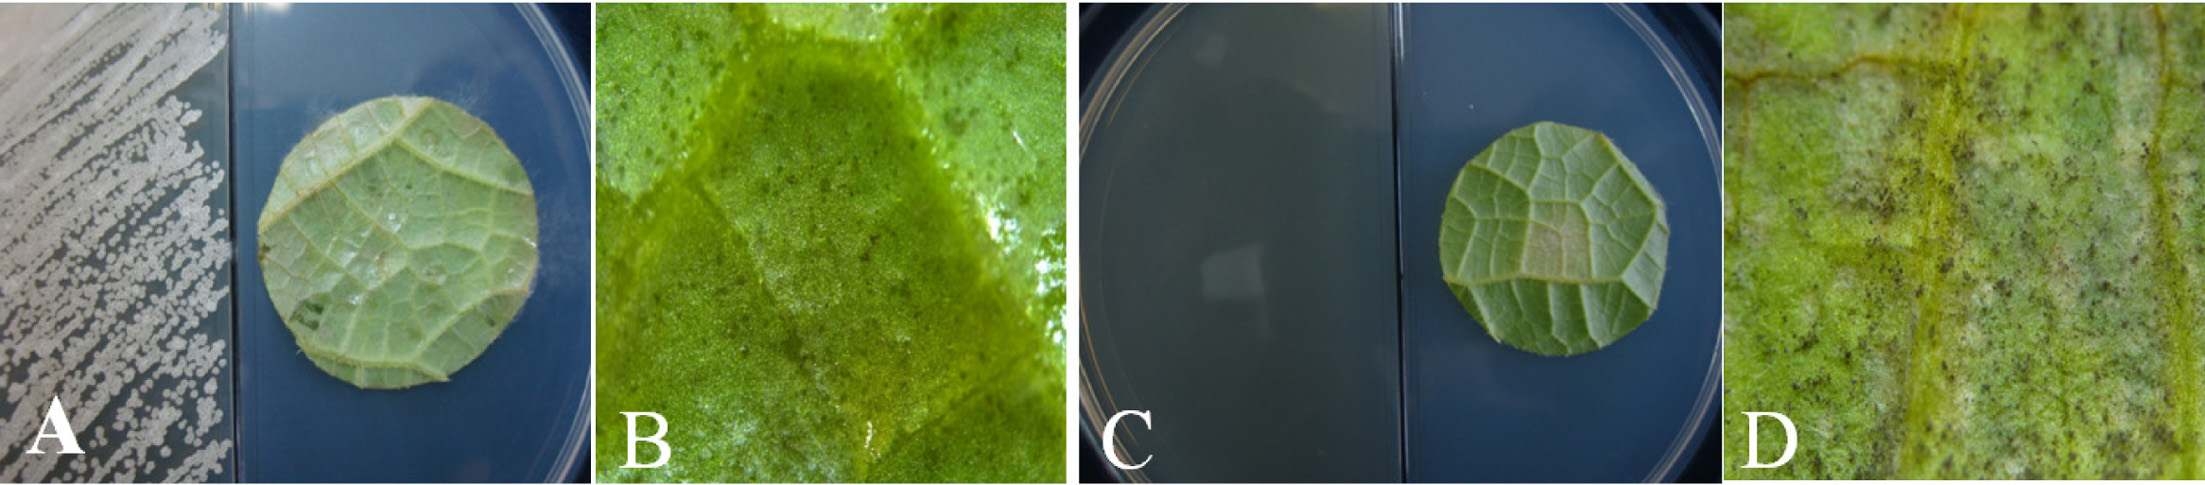 Suppression of downy mildew on cucumber by treated with volatile compounds of Bacillus amyloliquefaciens CC110 inside I plates at 20℃ for 8 days after inoculation of Pseudoperonospora cubensis.